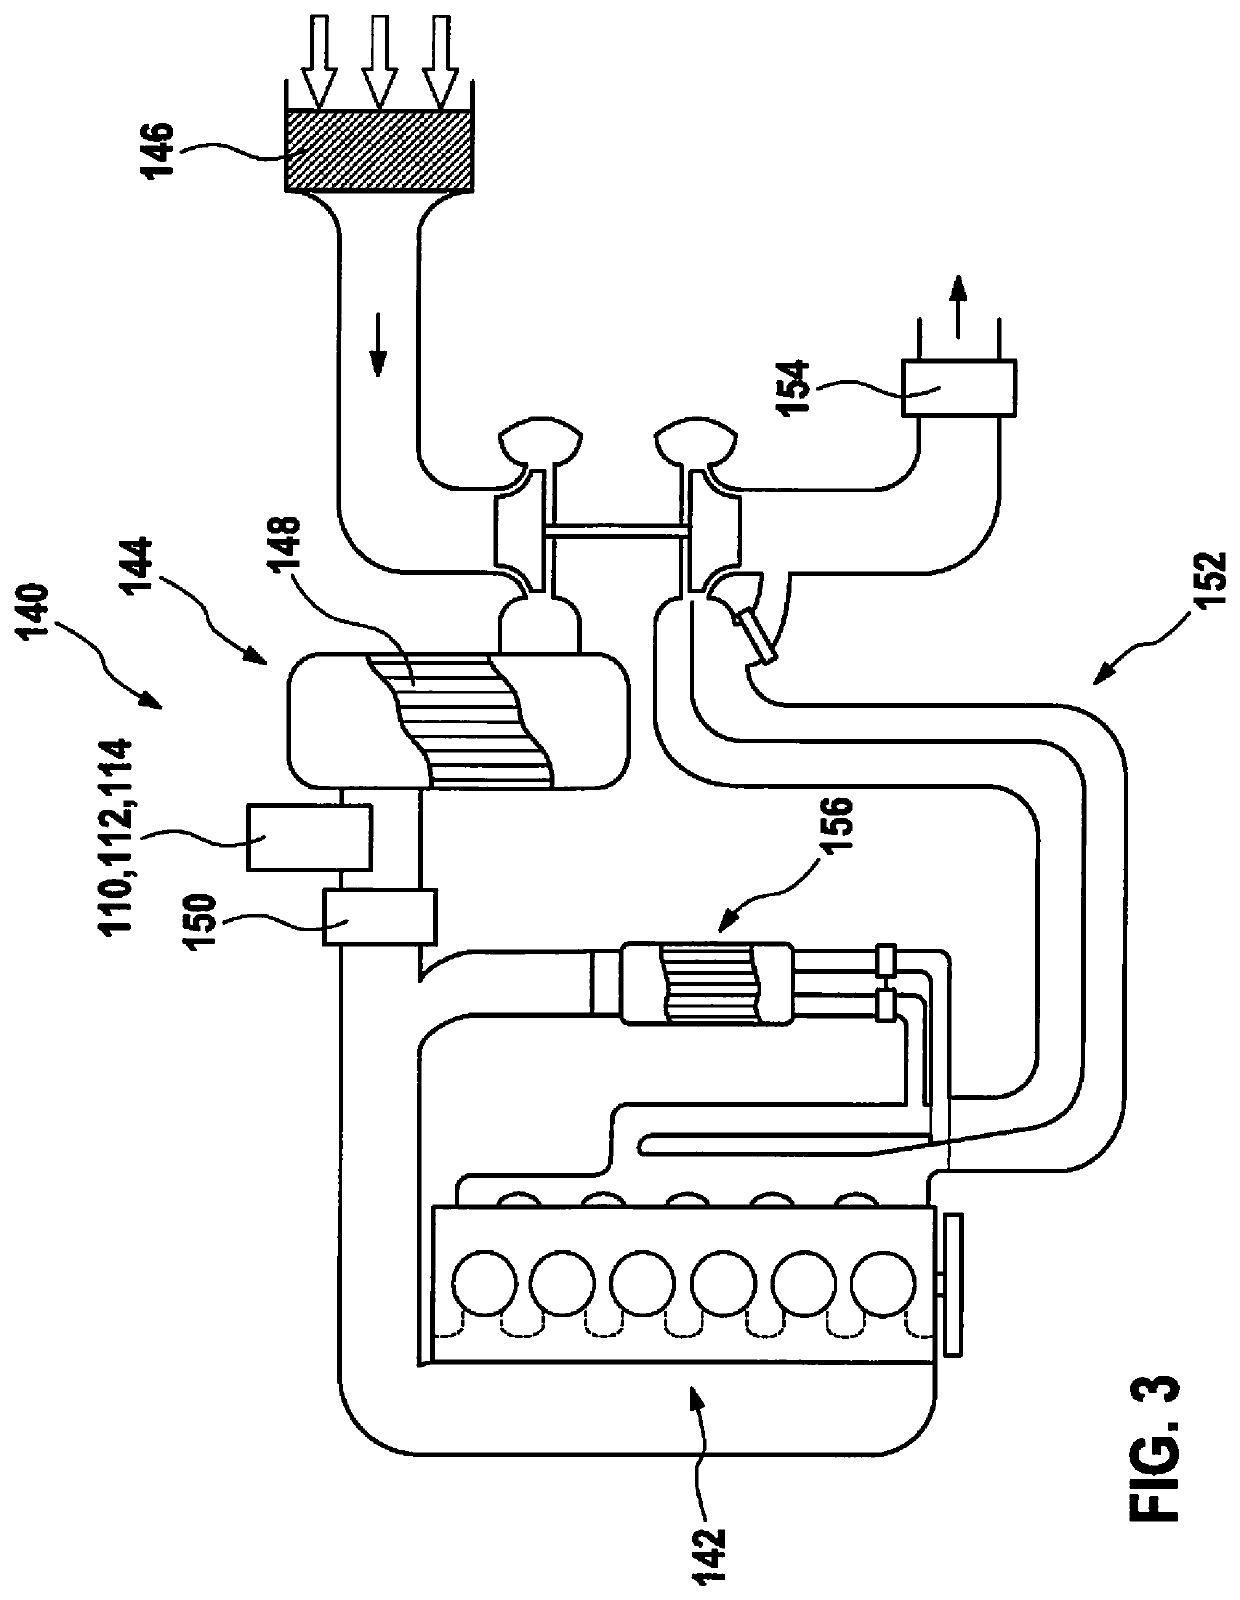 Pressure based flow sensor element having a pressure sensor and ribs positioned in the flow passage